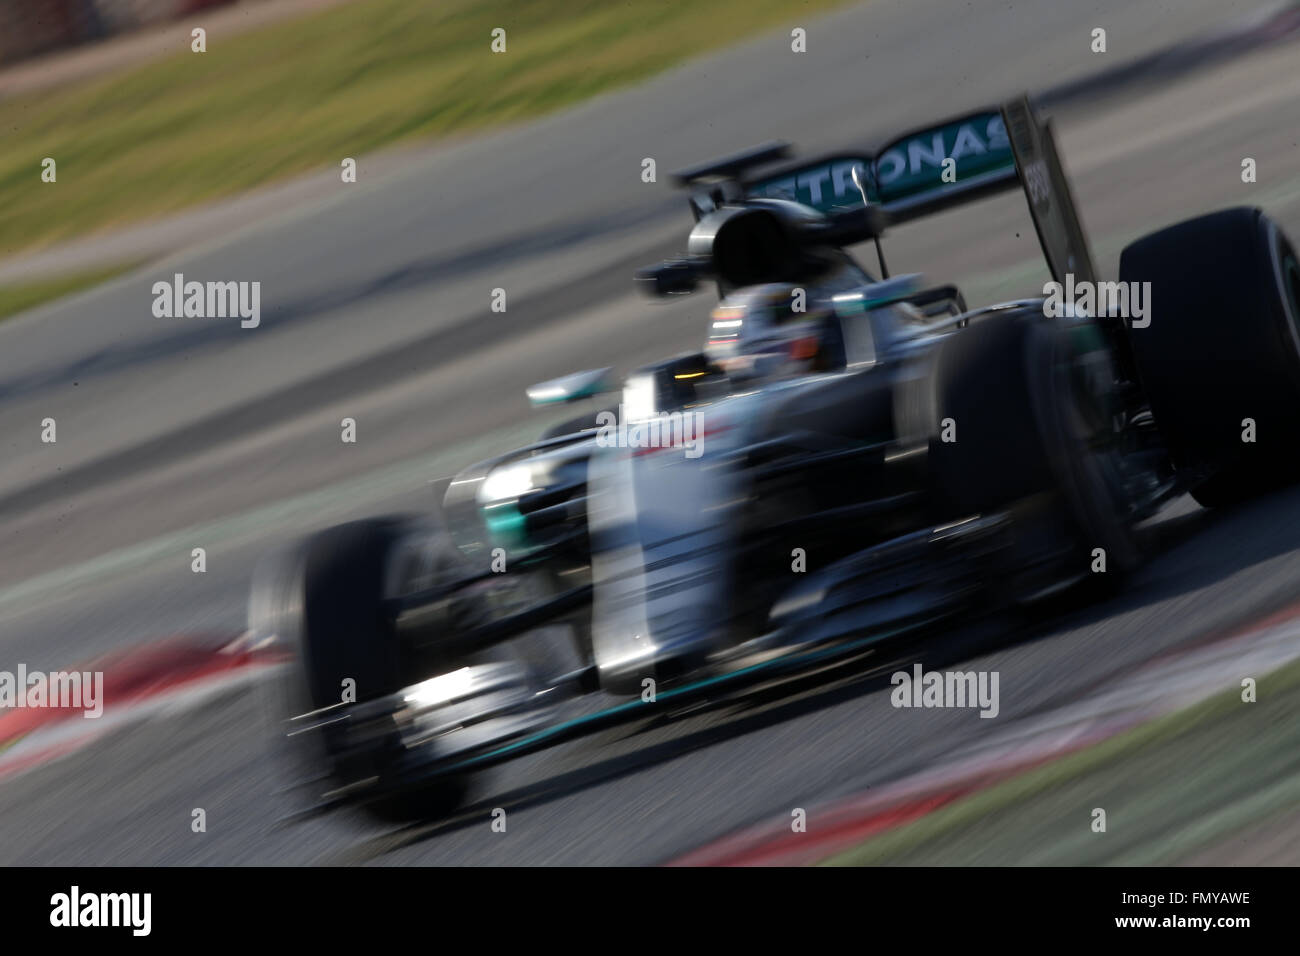 British Formula One driver Lewis Hamilton of Mercedes AMG steers his car during the training session for the upcoming Formula One season at the Circuit de Barcelona - Catalunya in Barcelona, Spain, 24 February 2016. Photo: Jens Buettner/dpa Stock Photo